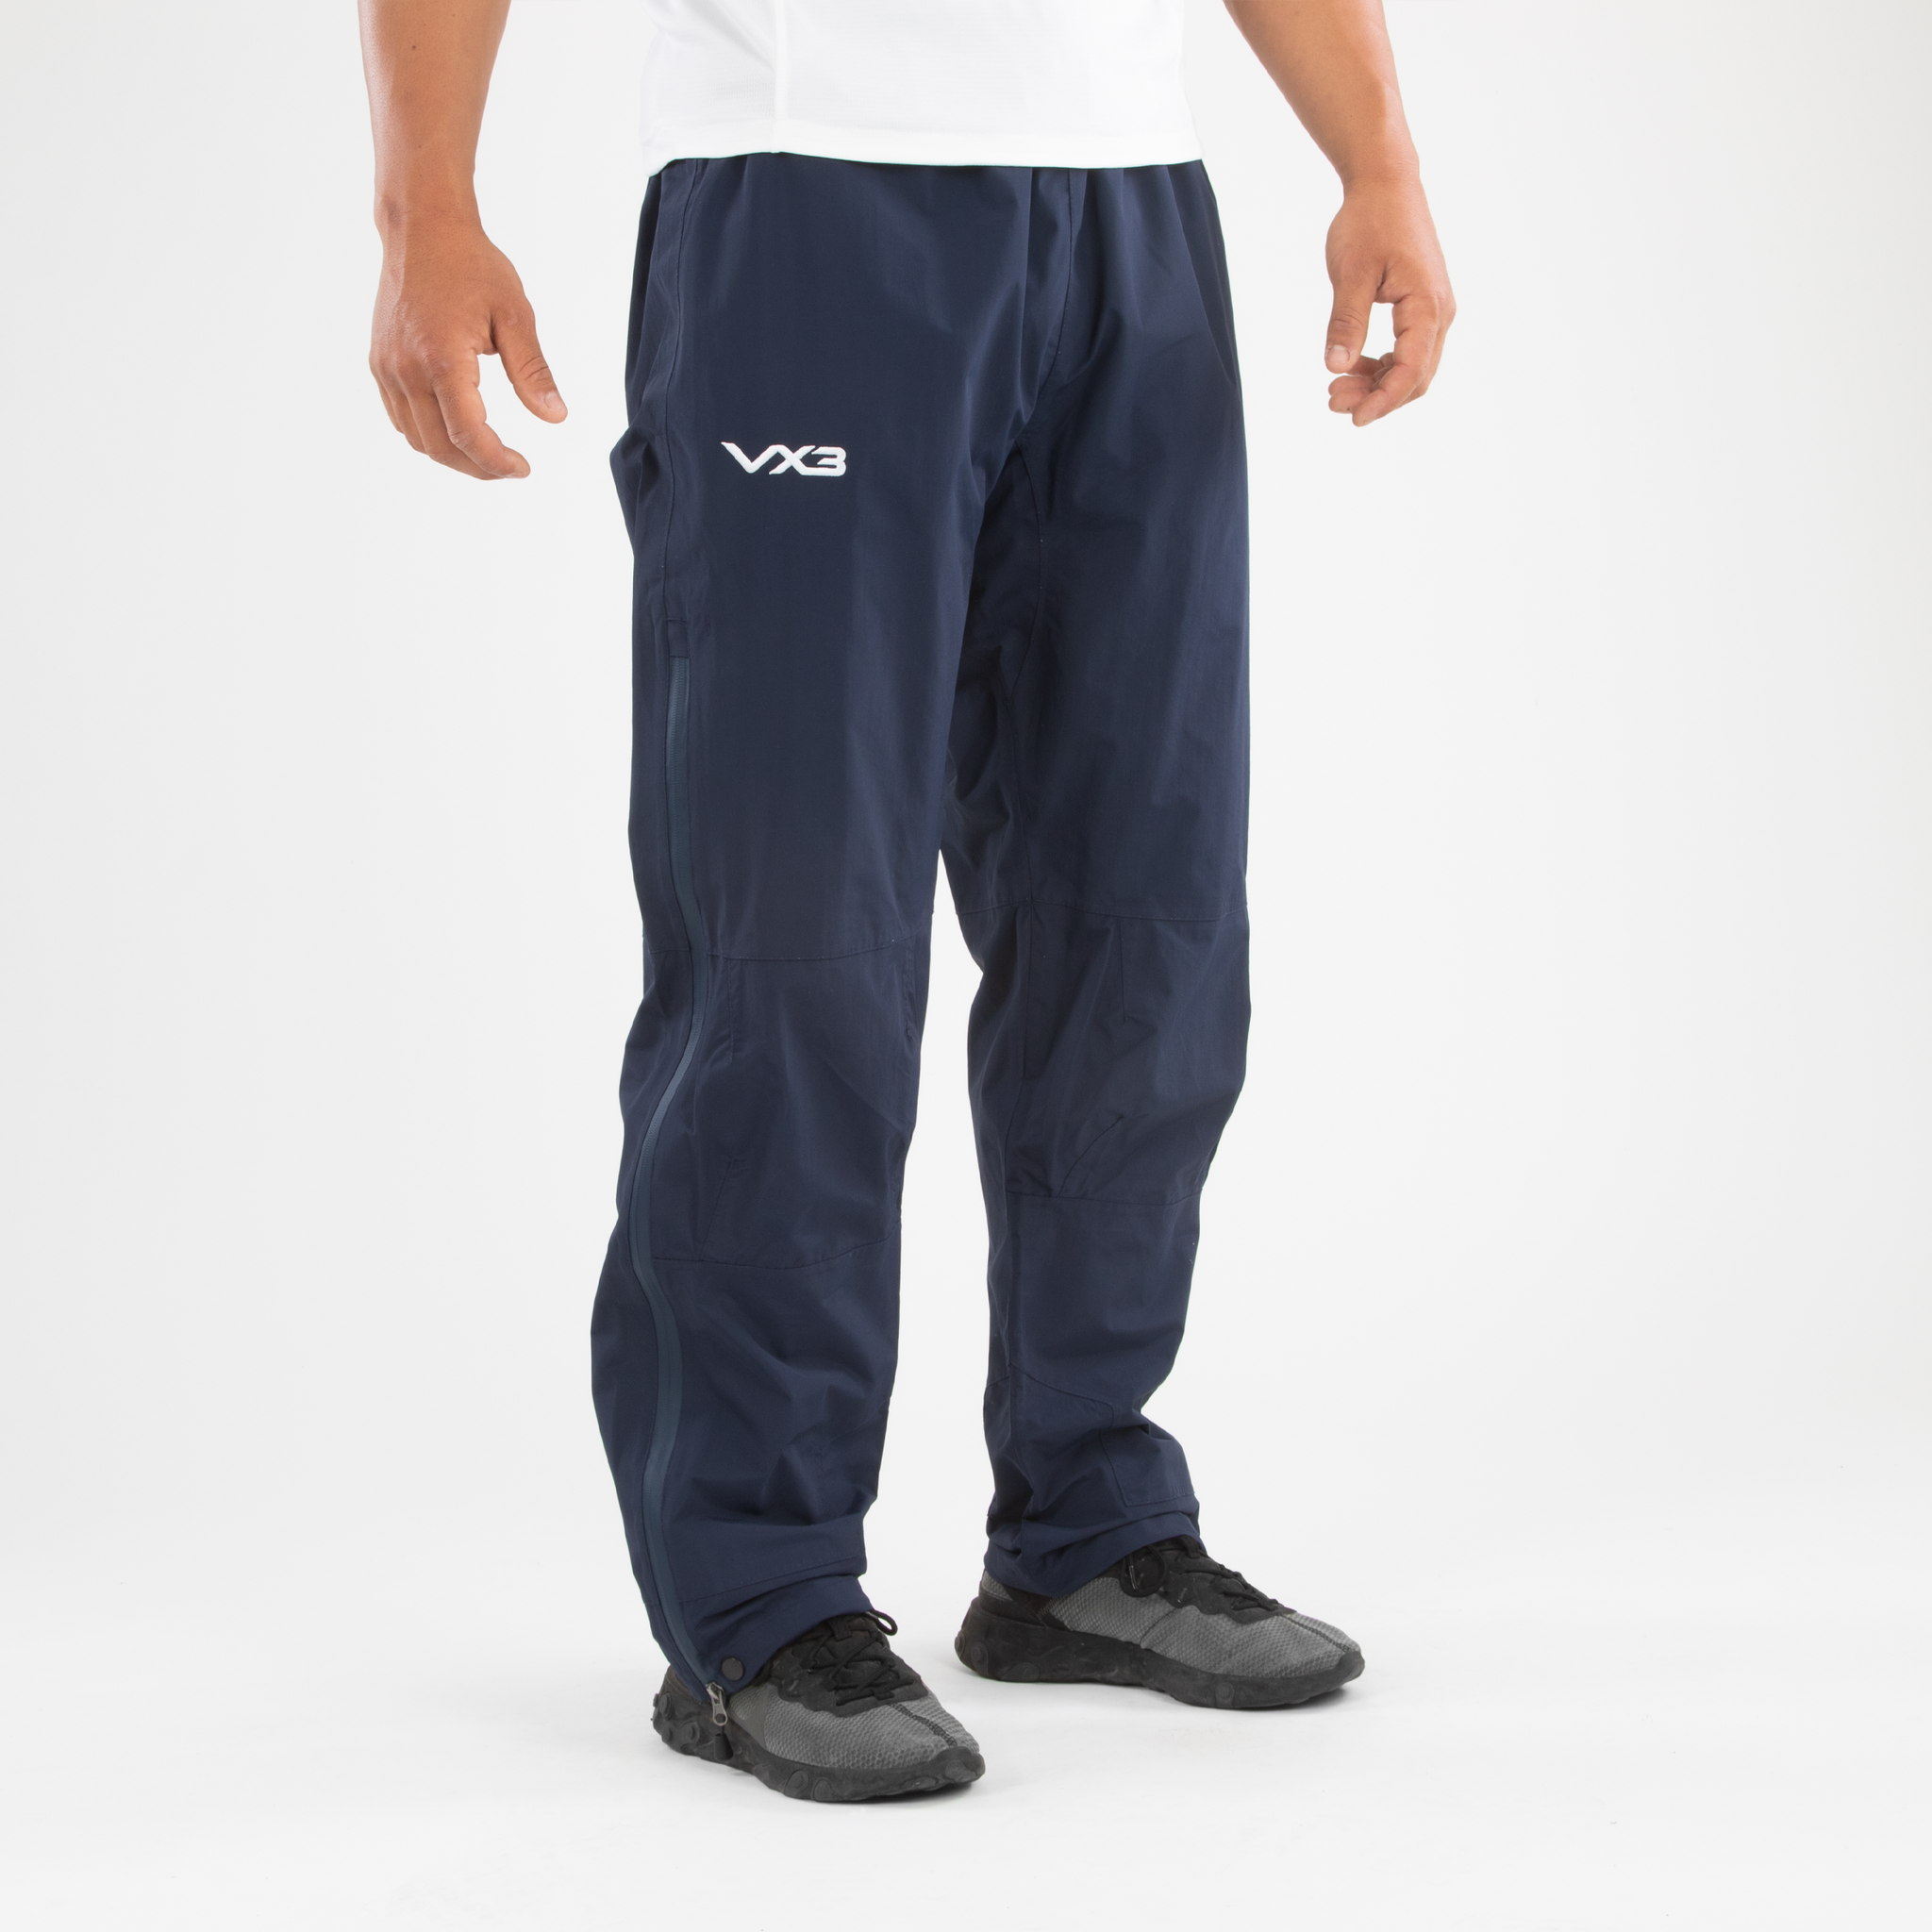 Protego Waterproof Trousers Navy – VX3